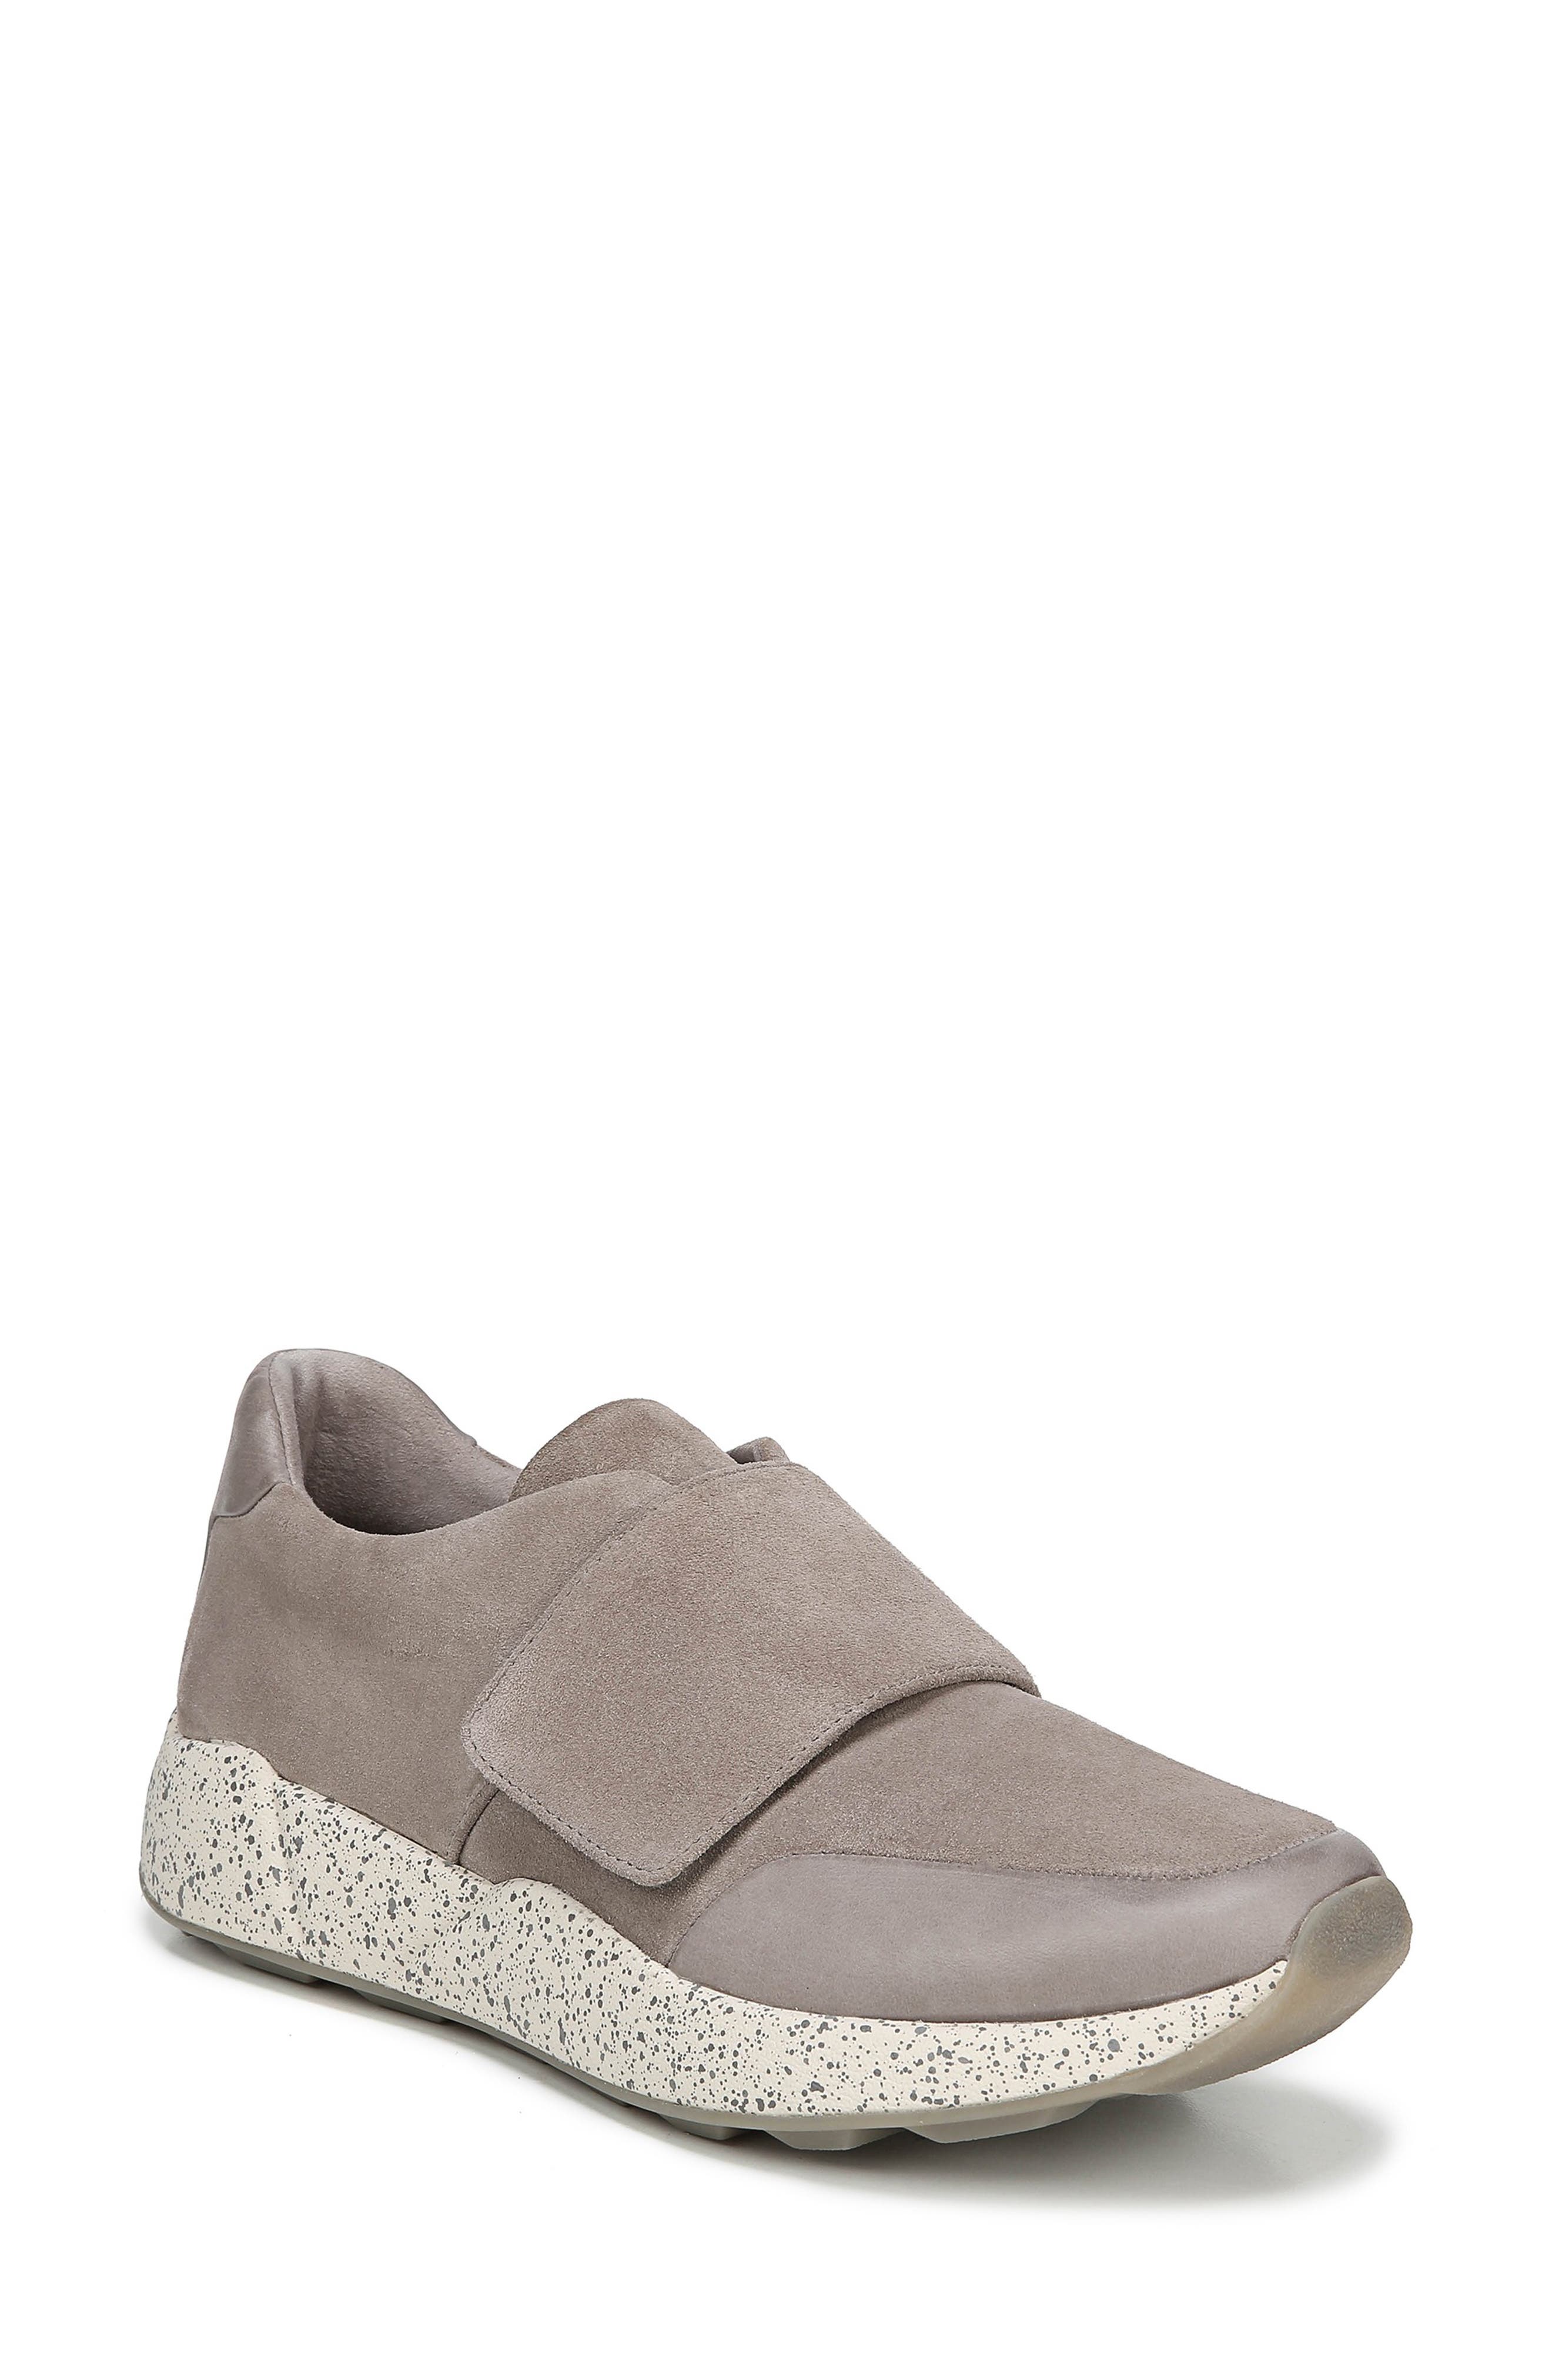 UPC 736709001351 product image for Women's Vince Gage Sneaker, Size 8 M - Beige | upcitemdb.com